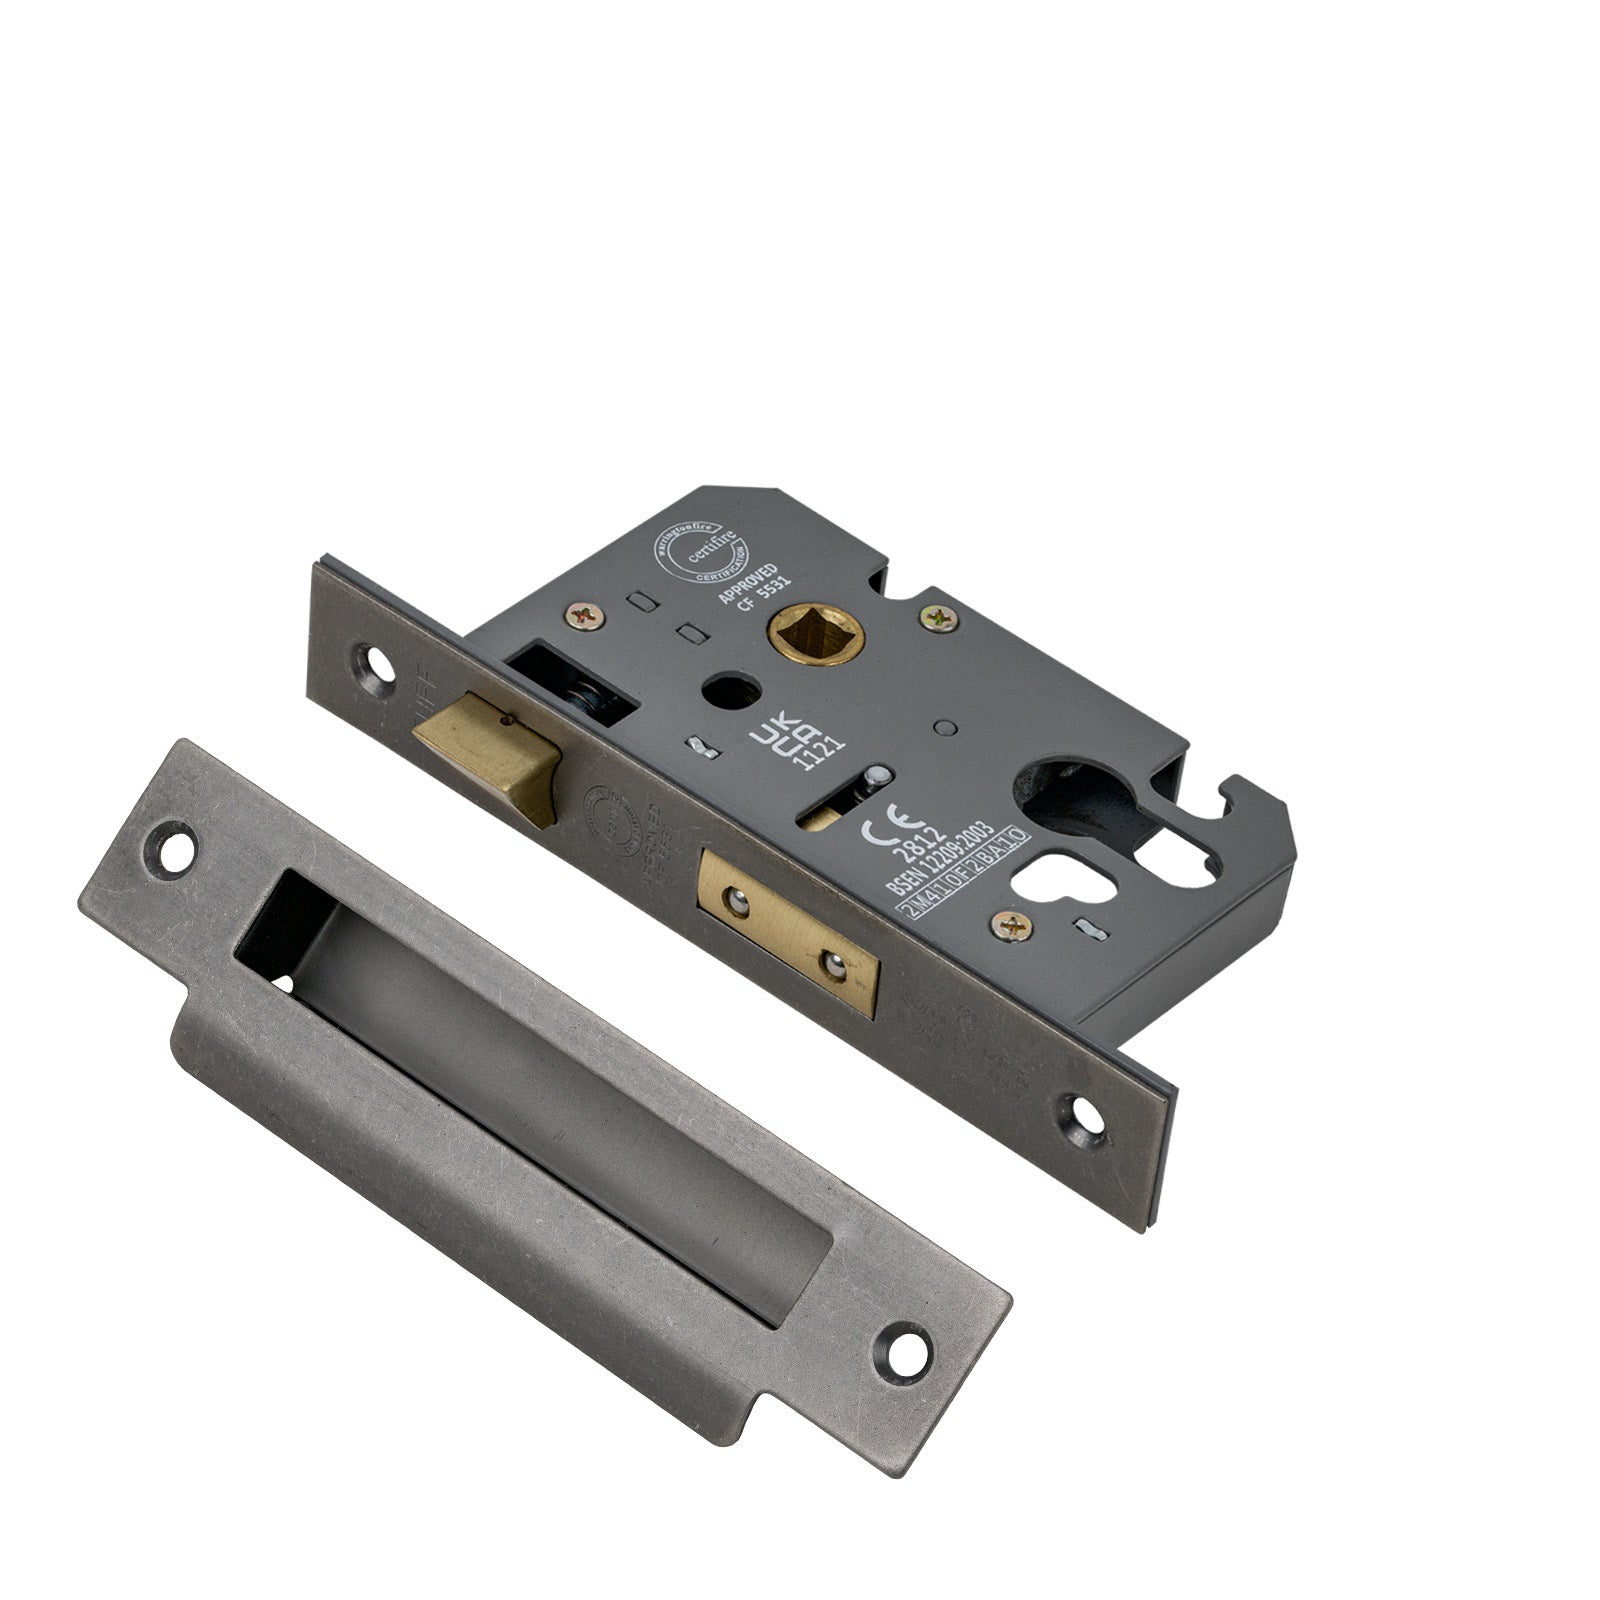 SHOW 3 Lever Euro Sash Lock - 2.5 Inch with Distressed Silver finished forend and striker plate